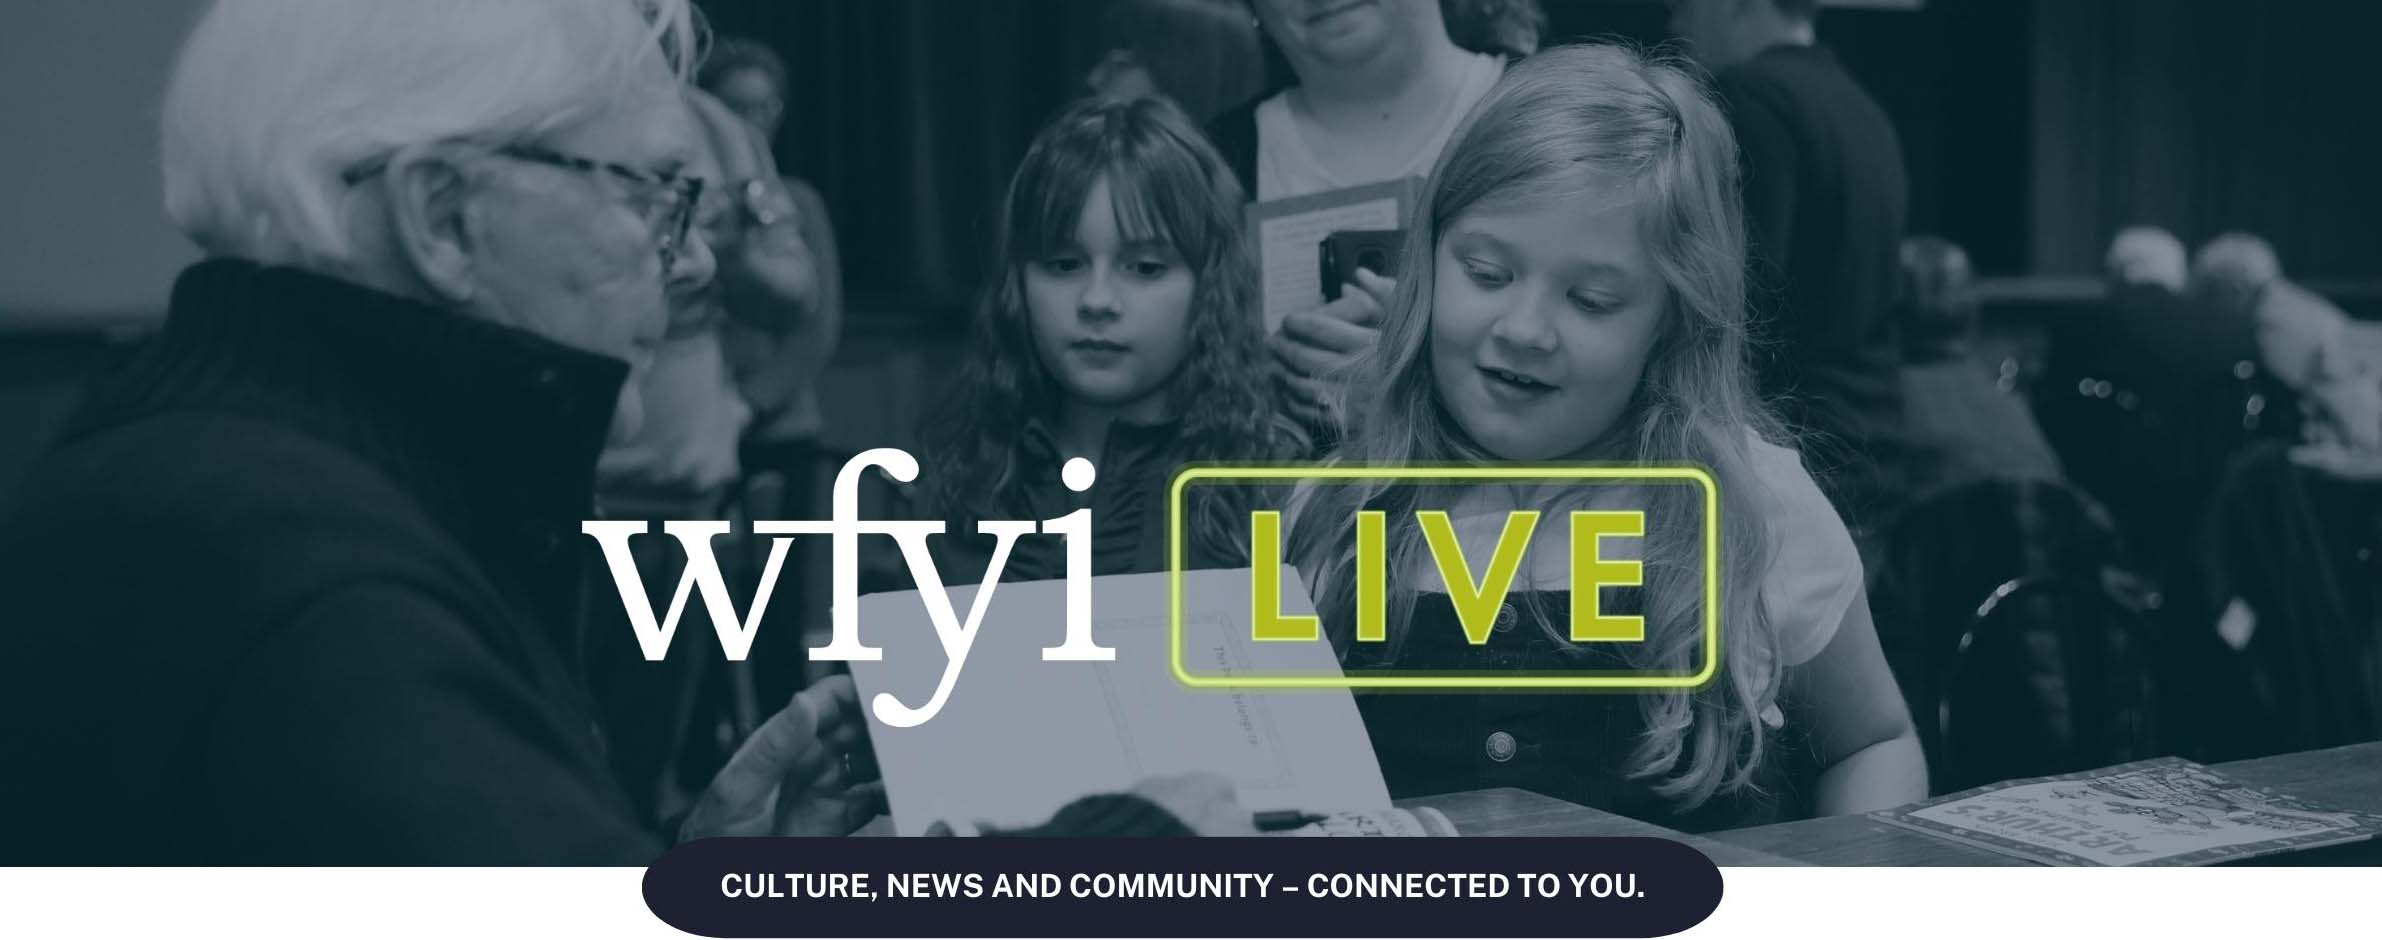 WFYI Live - Culture, News and Community. Connected to you.